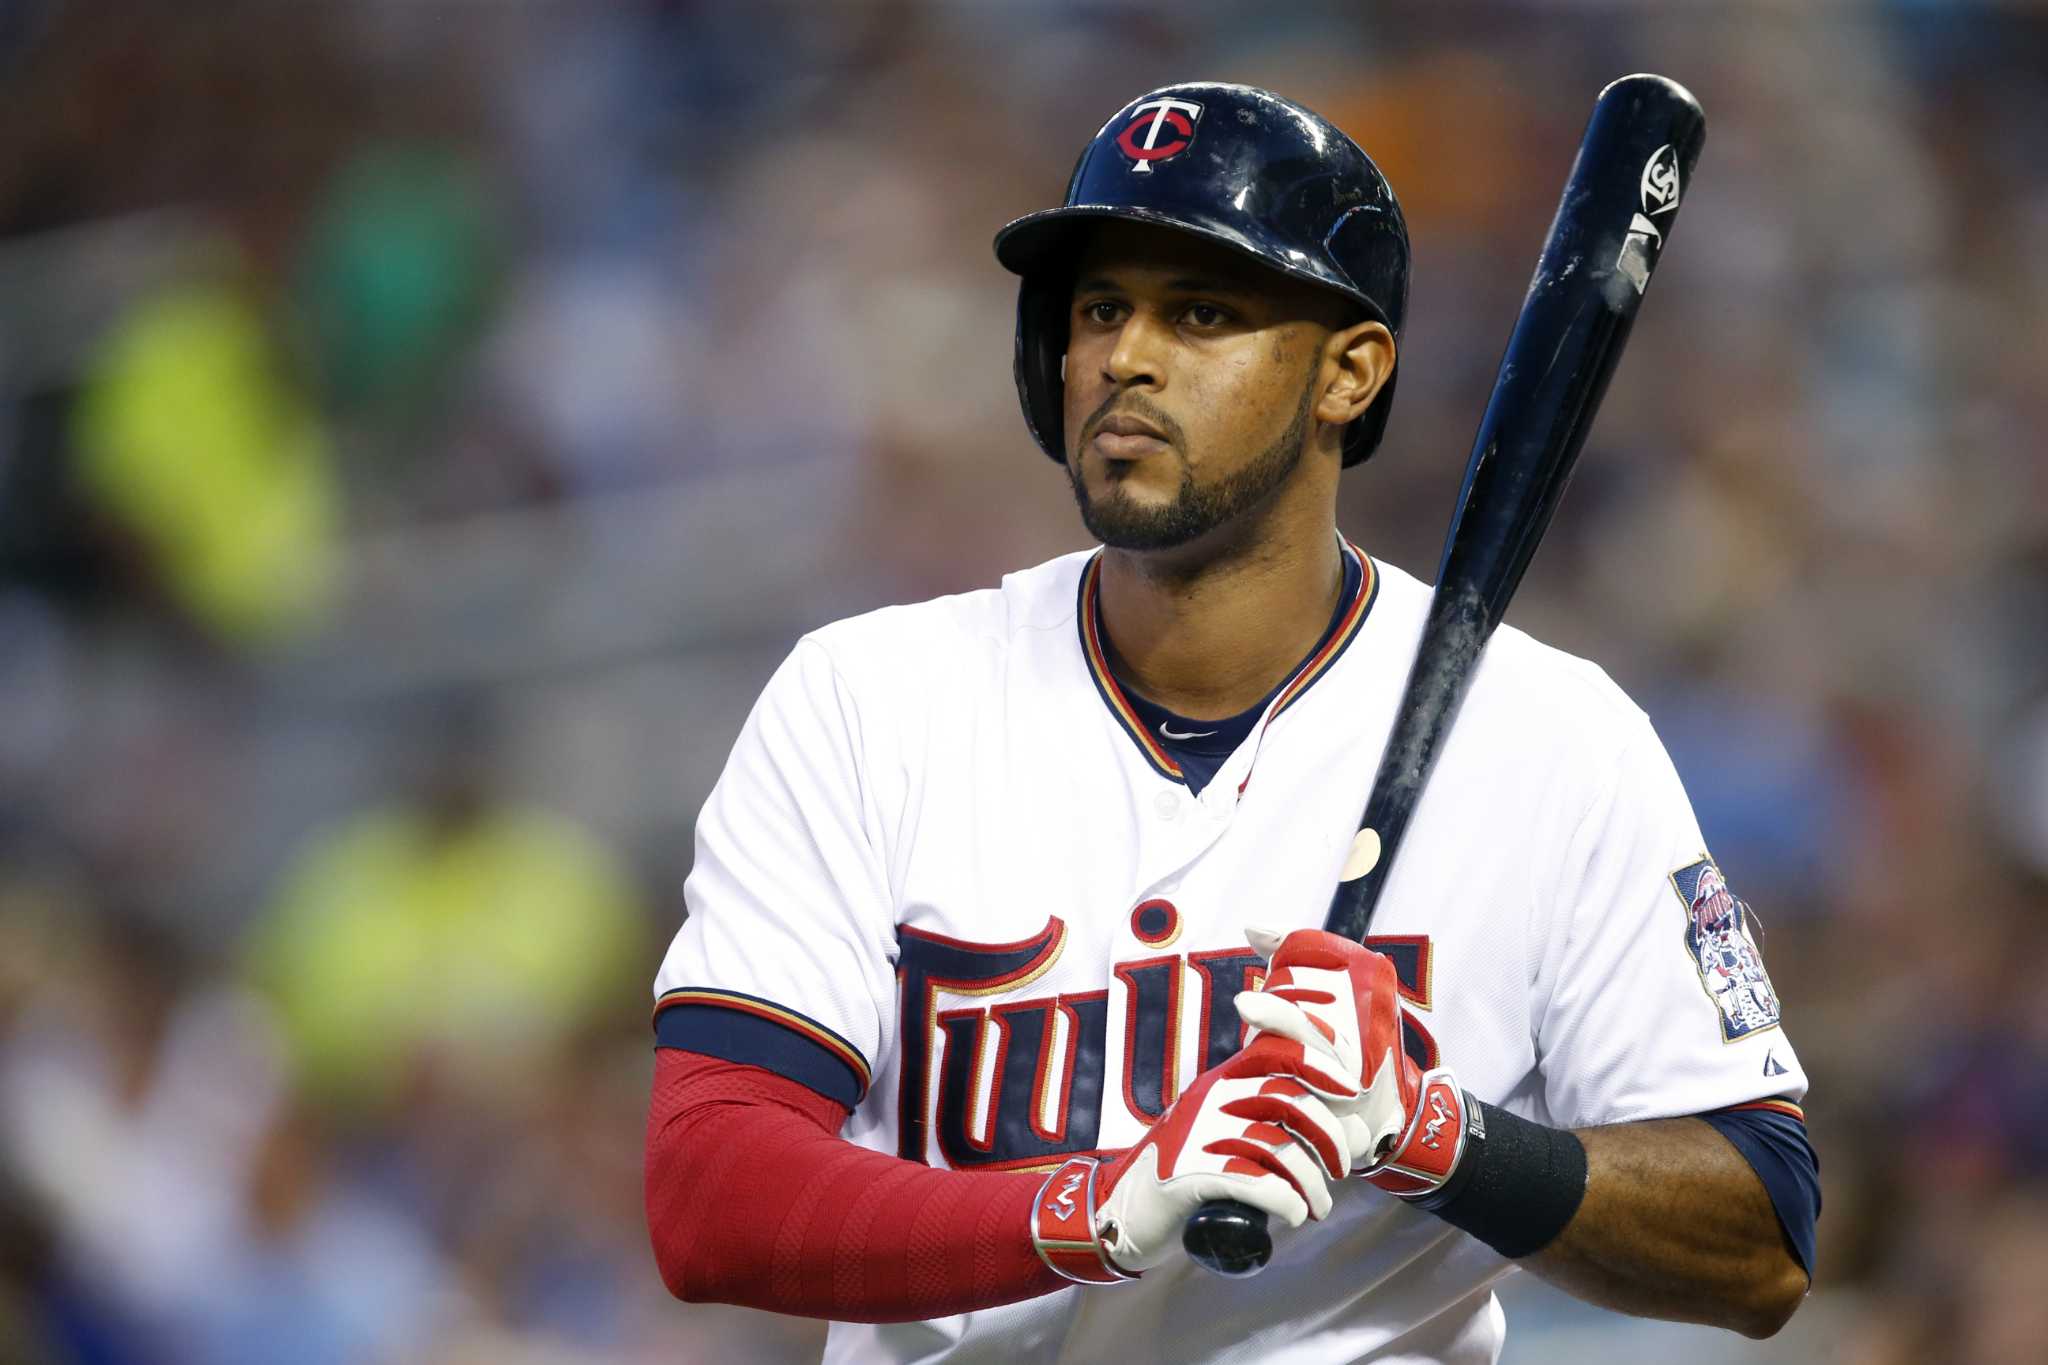 Aaron Hicks is a major problem, but what can Yankees do?